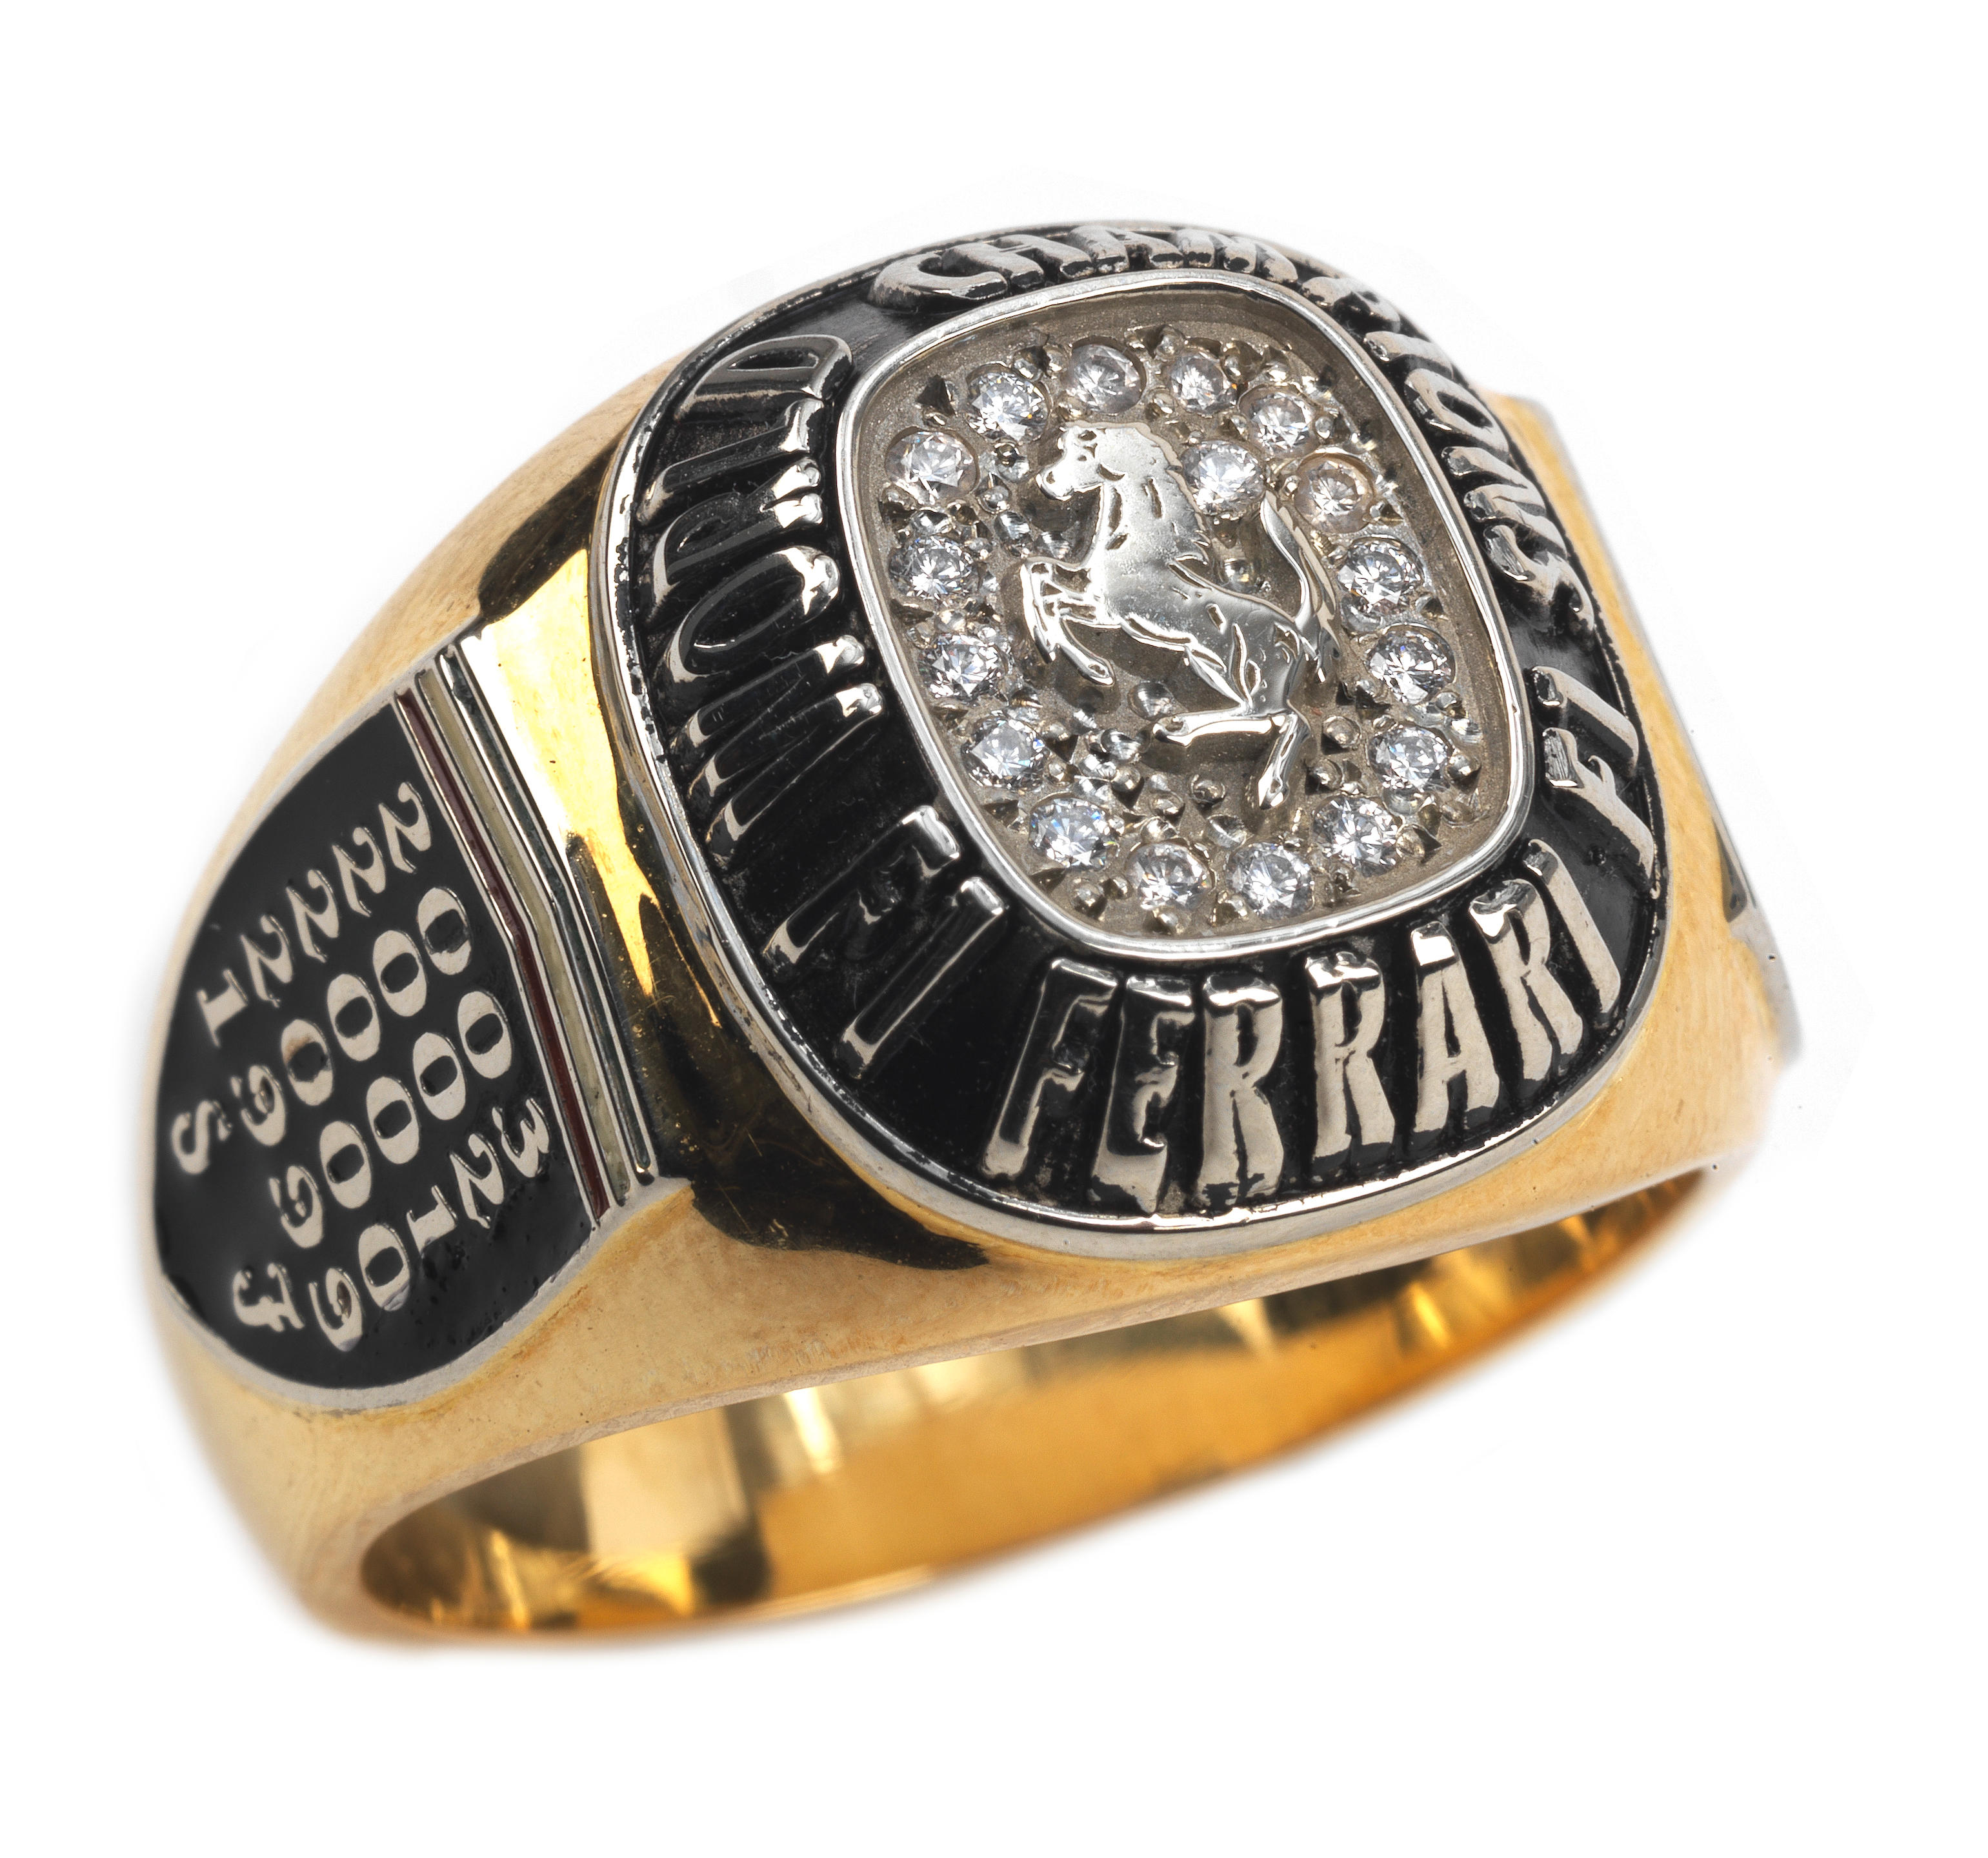 One of the rings commissioned by the German legend to members of his team at the end of the 2003 season is going on sale